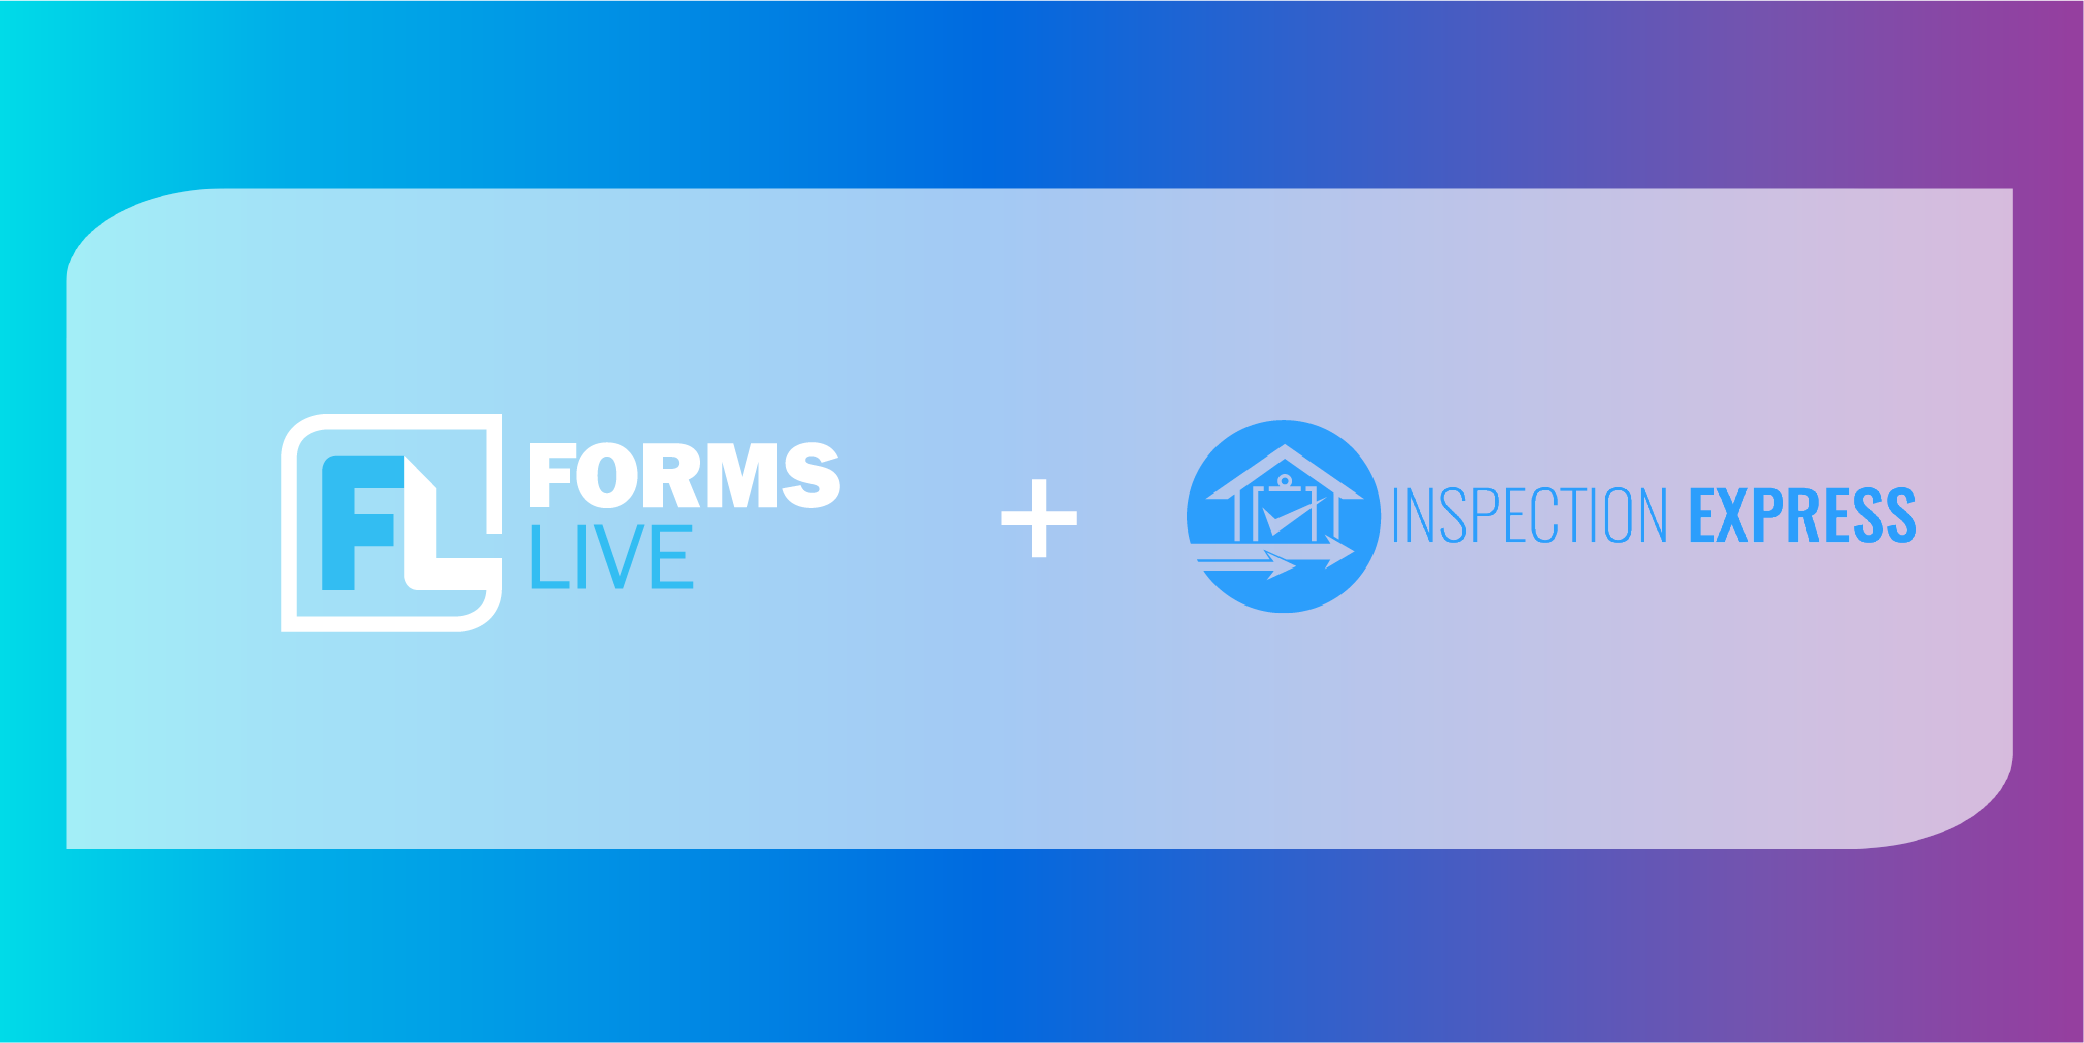 Save more time using Forms Live’s integration with Inspection Express